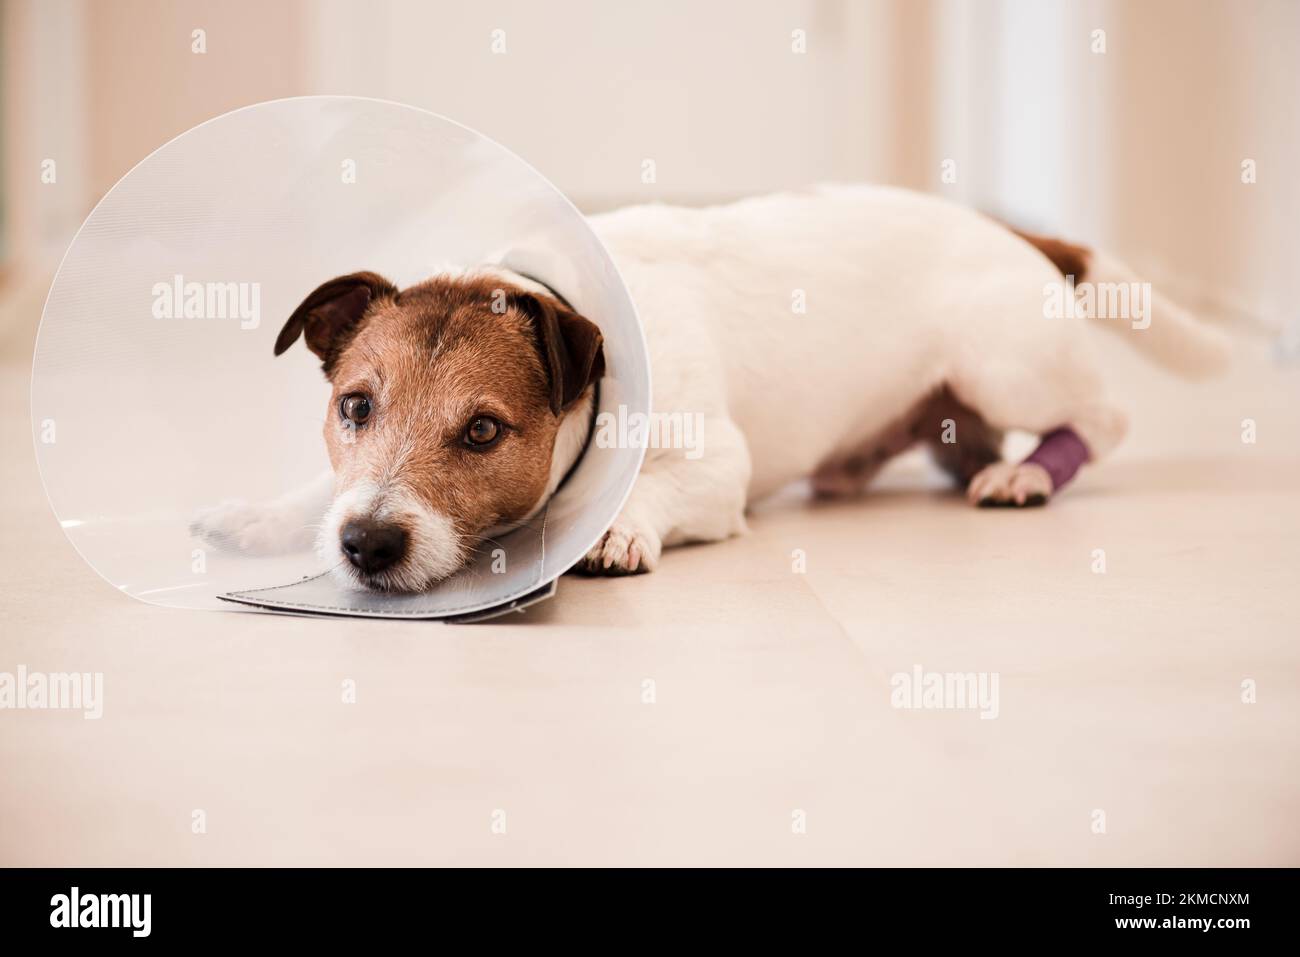 Doggy with injured paw in bandages. Dog needs vet collar cone to stop licking and gnawing wound Stock Photo